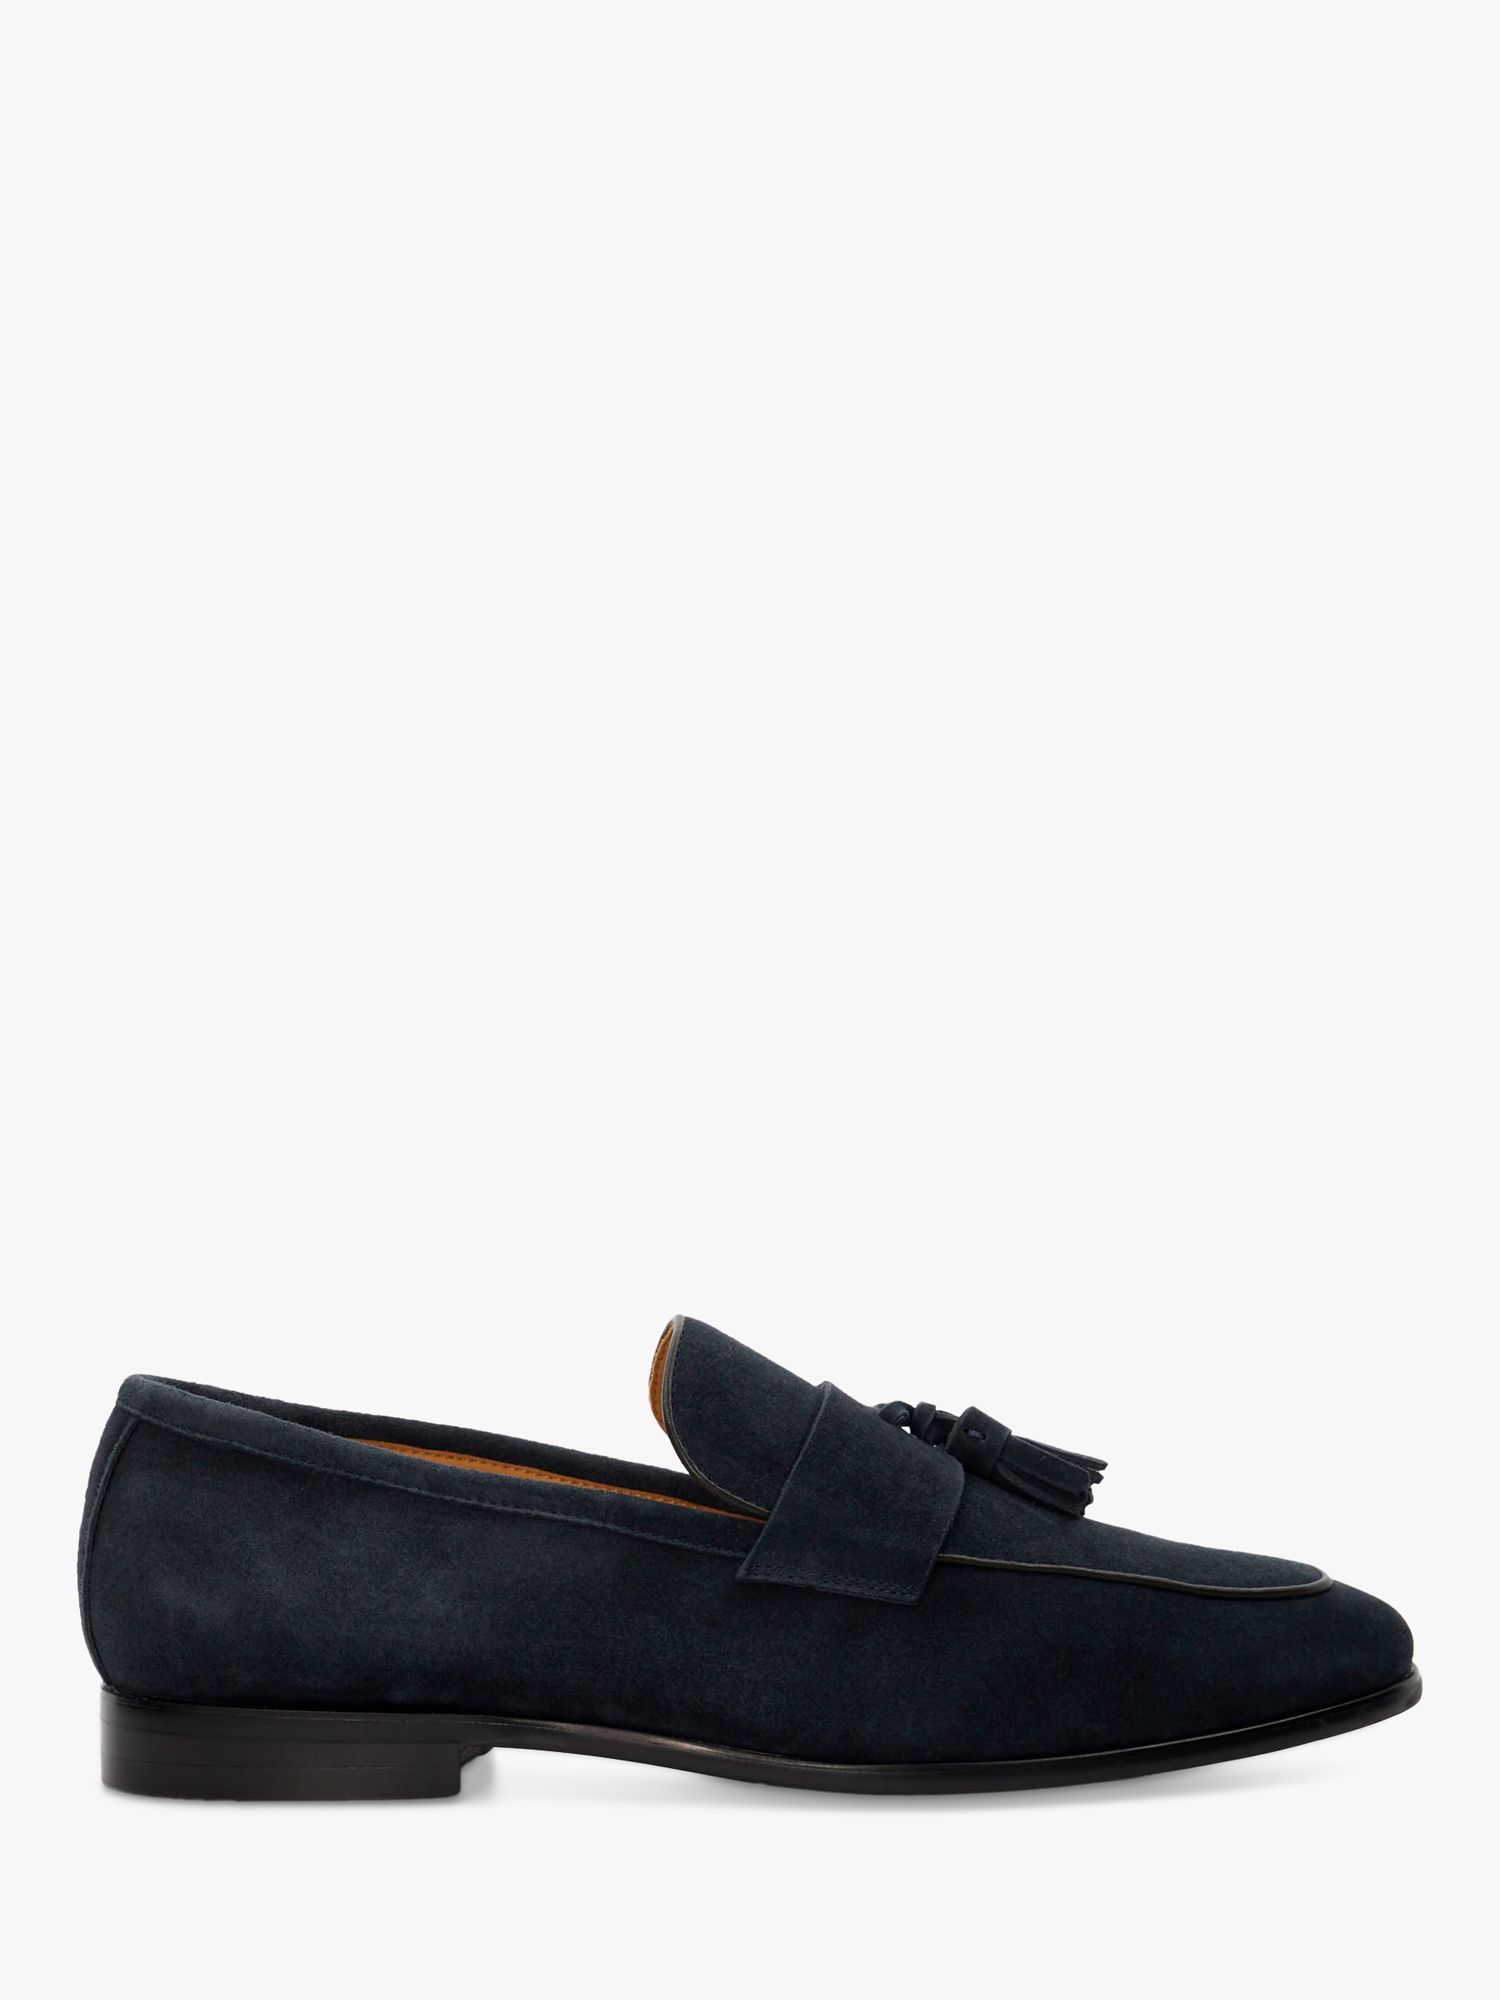 Dune Saxxton Suede Tassle Loafers, Navy at John Lewis & Partners